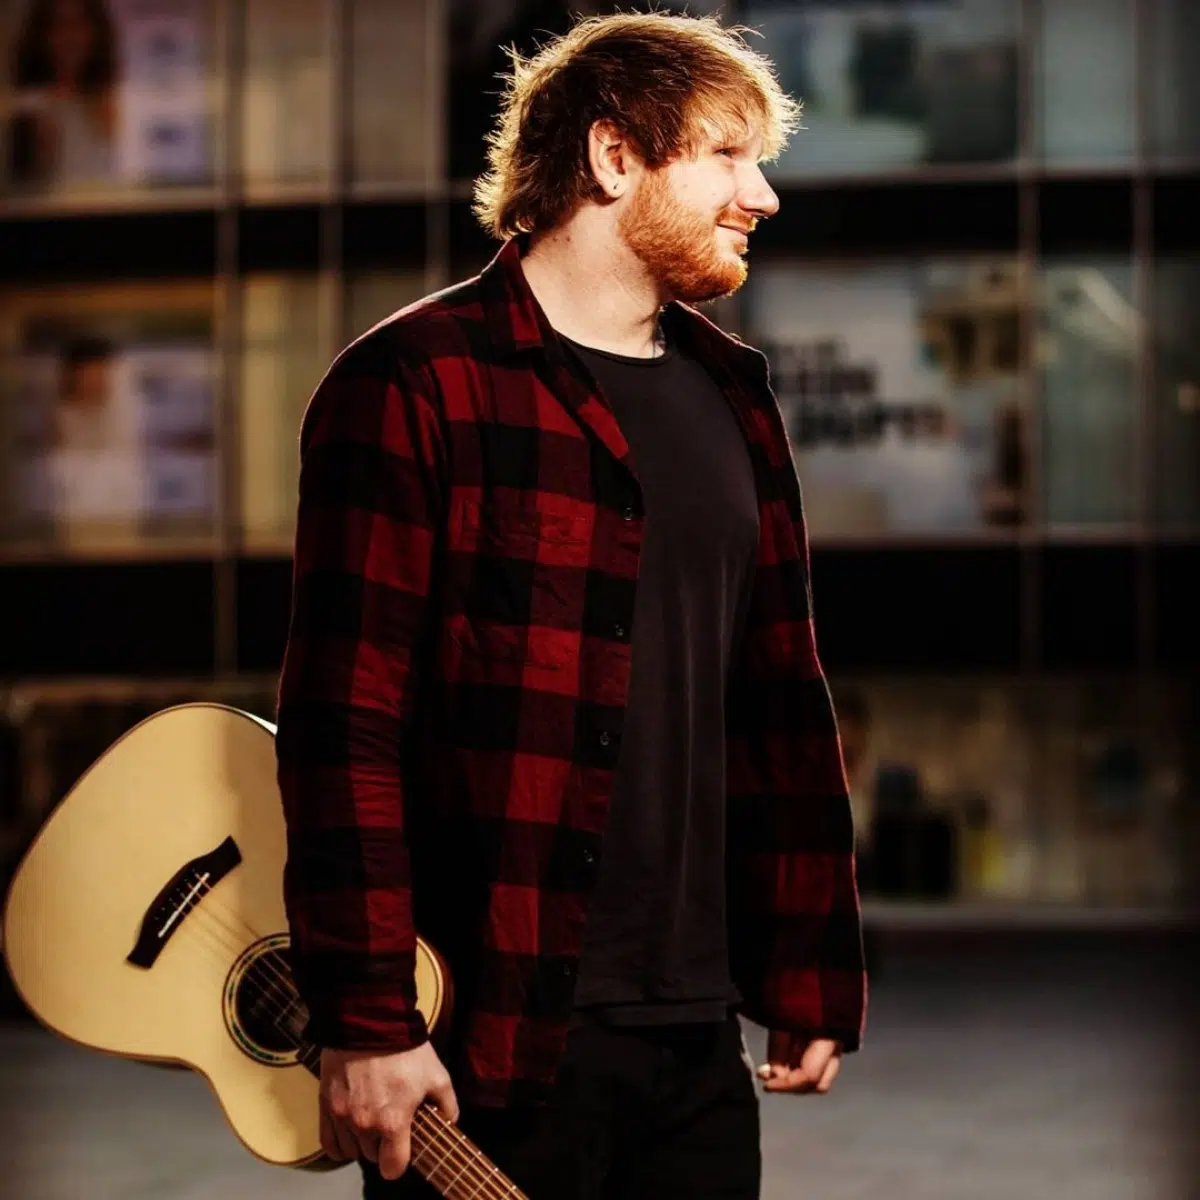 DOWNLOAD: Ed Sheeran – “Thinking Out Loud” Video + Audio Mp3